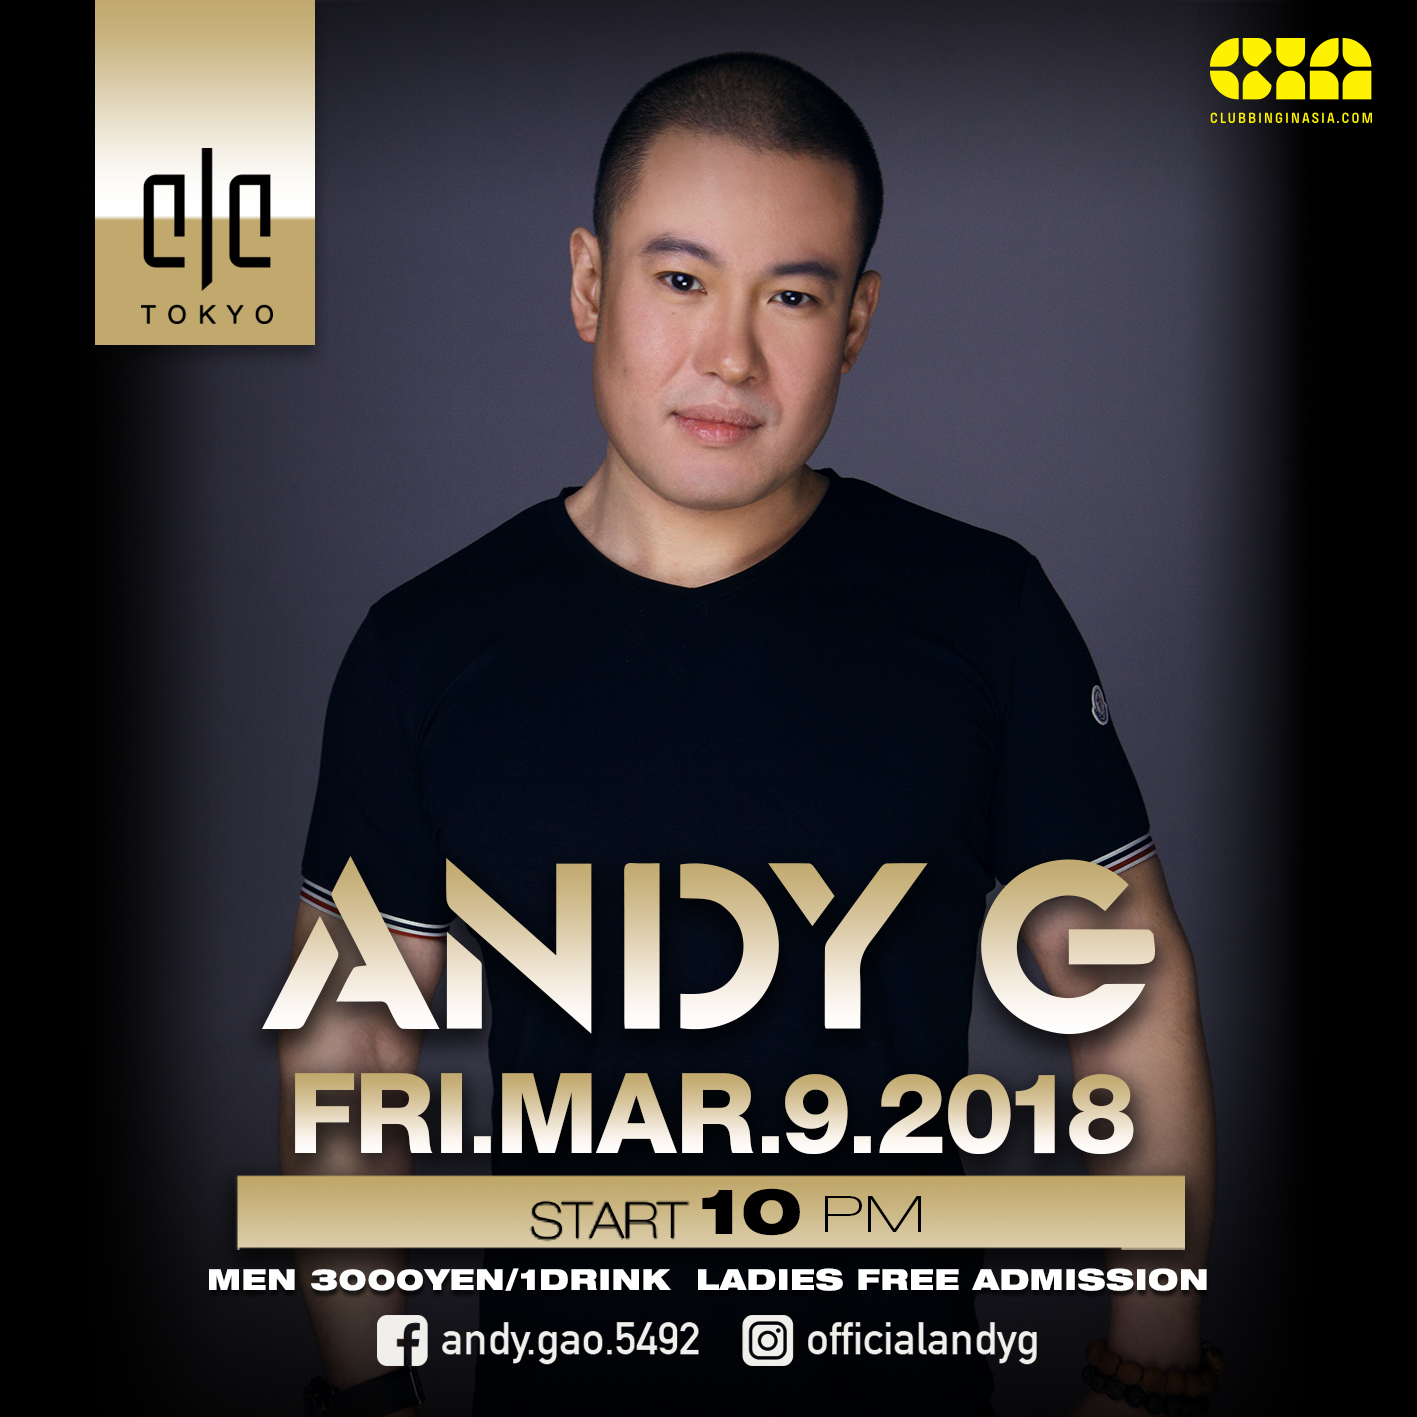 ANDY G